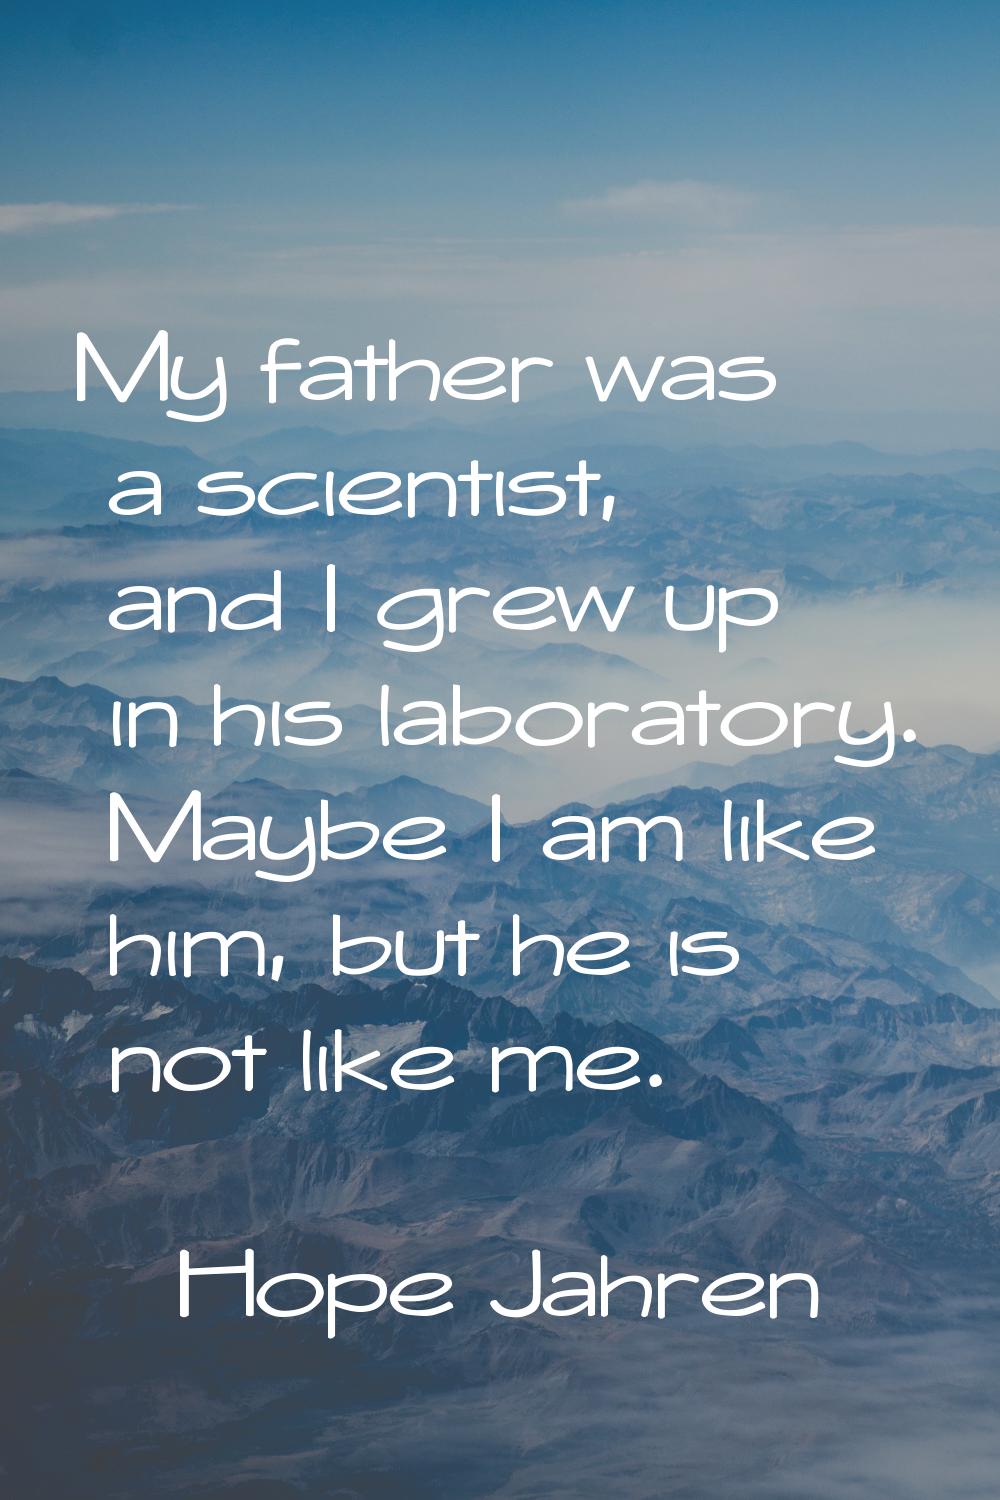 My father was a scientist, and I grew up in his laboratory. Maybe I am like him, but he is not like